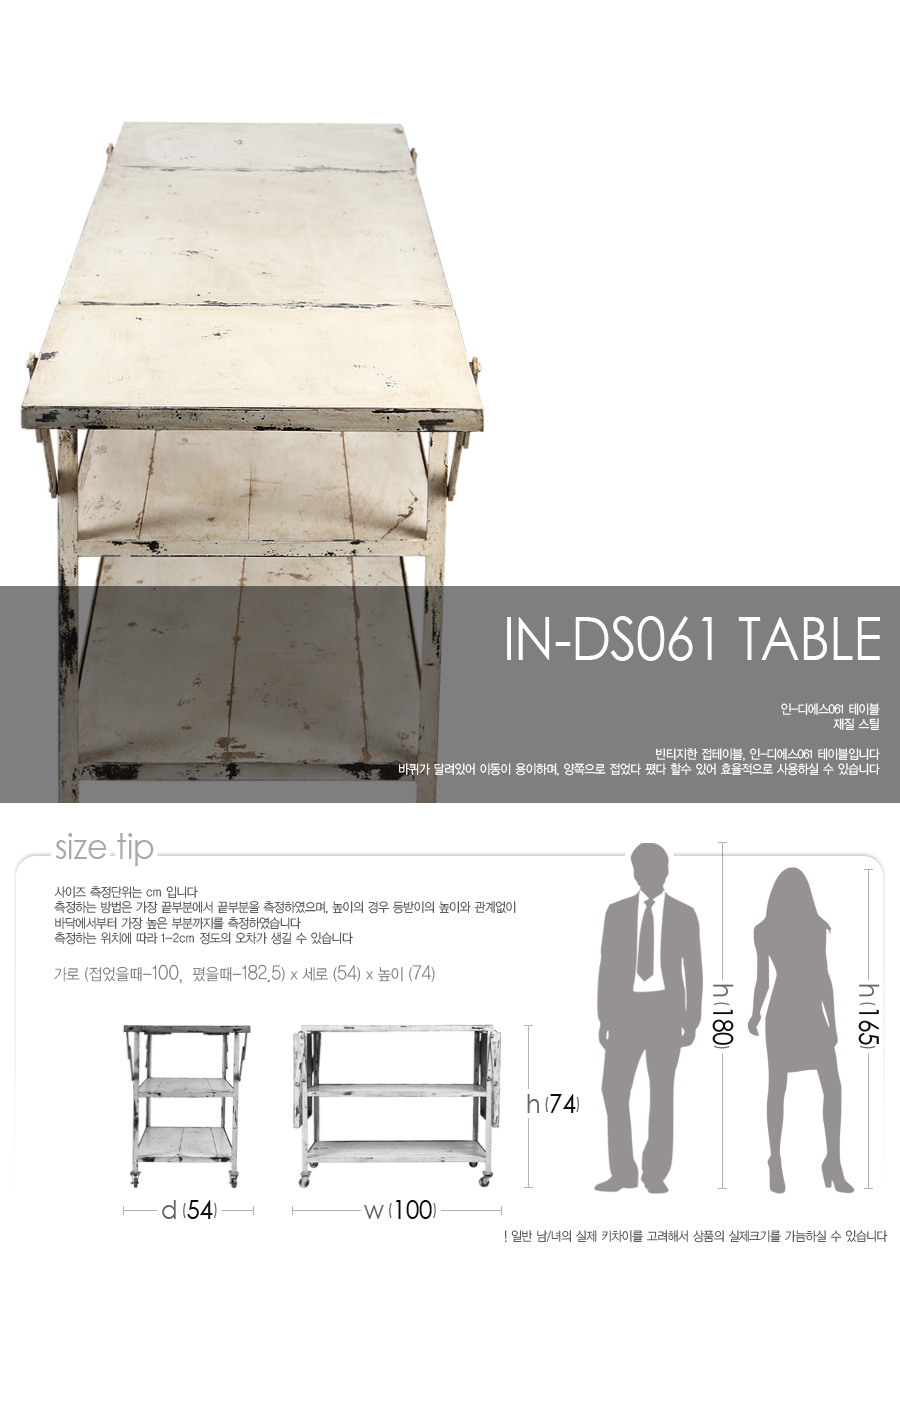 in-ds061-table_01.jpg